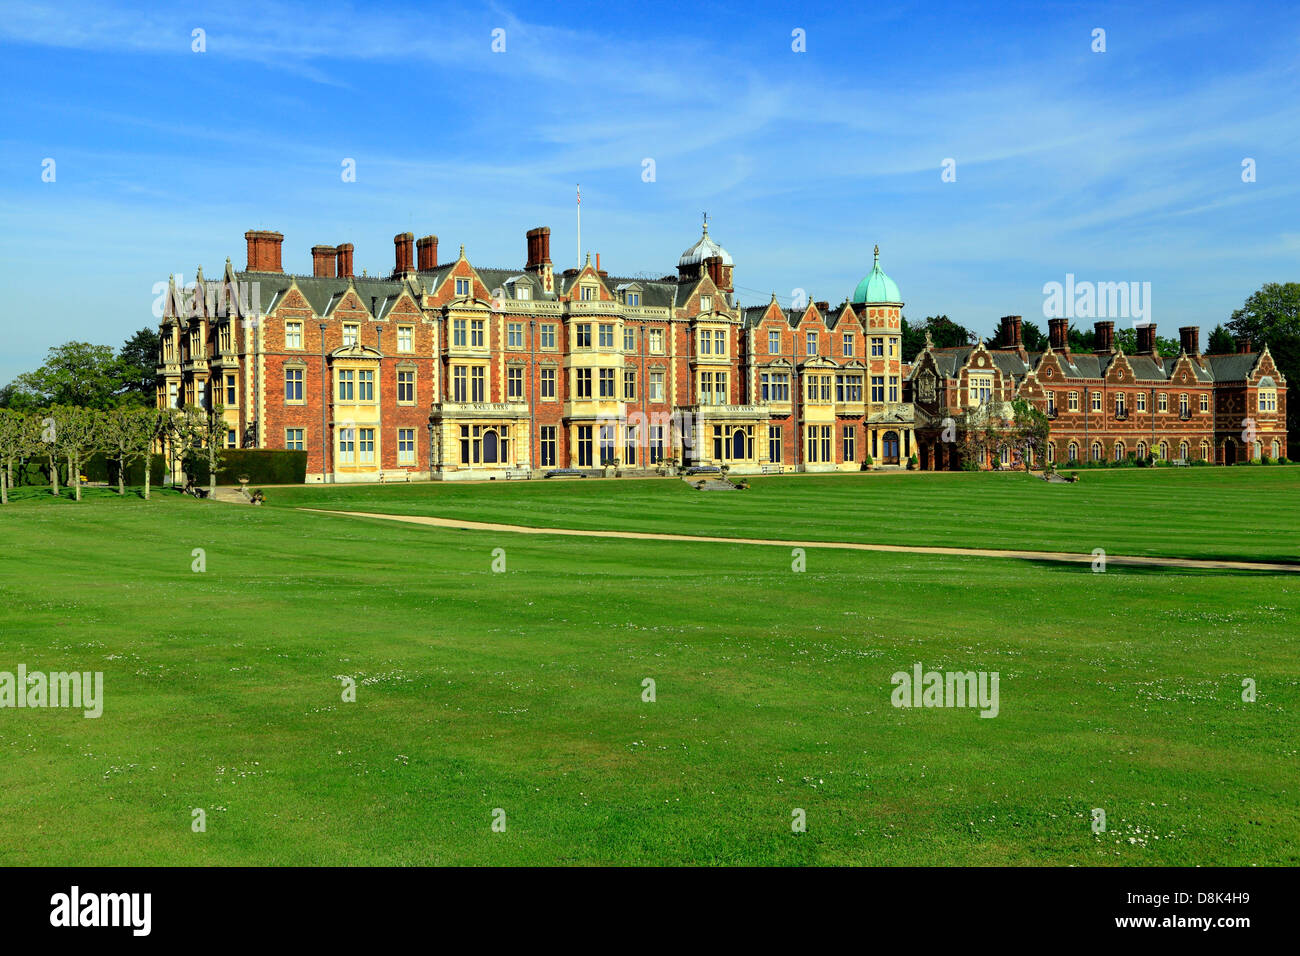 Sandringham House, Norfolk, country retreat of HM the Queen, 19th century British Victorian architecture, England UK Stock Photo